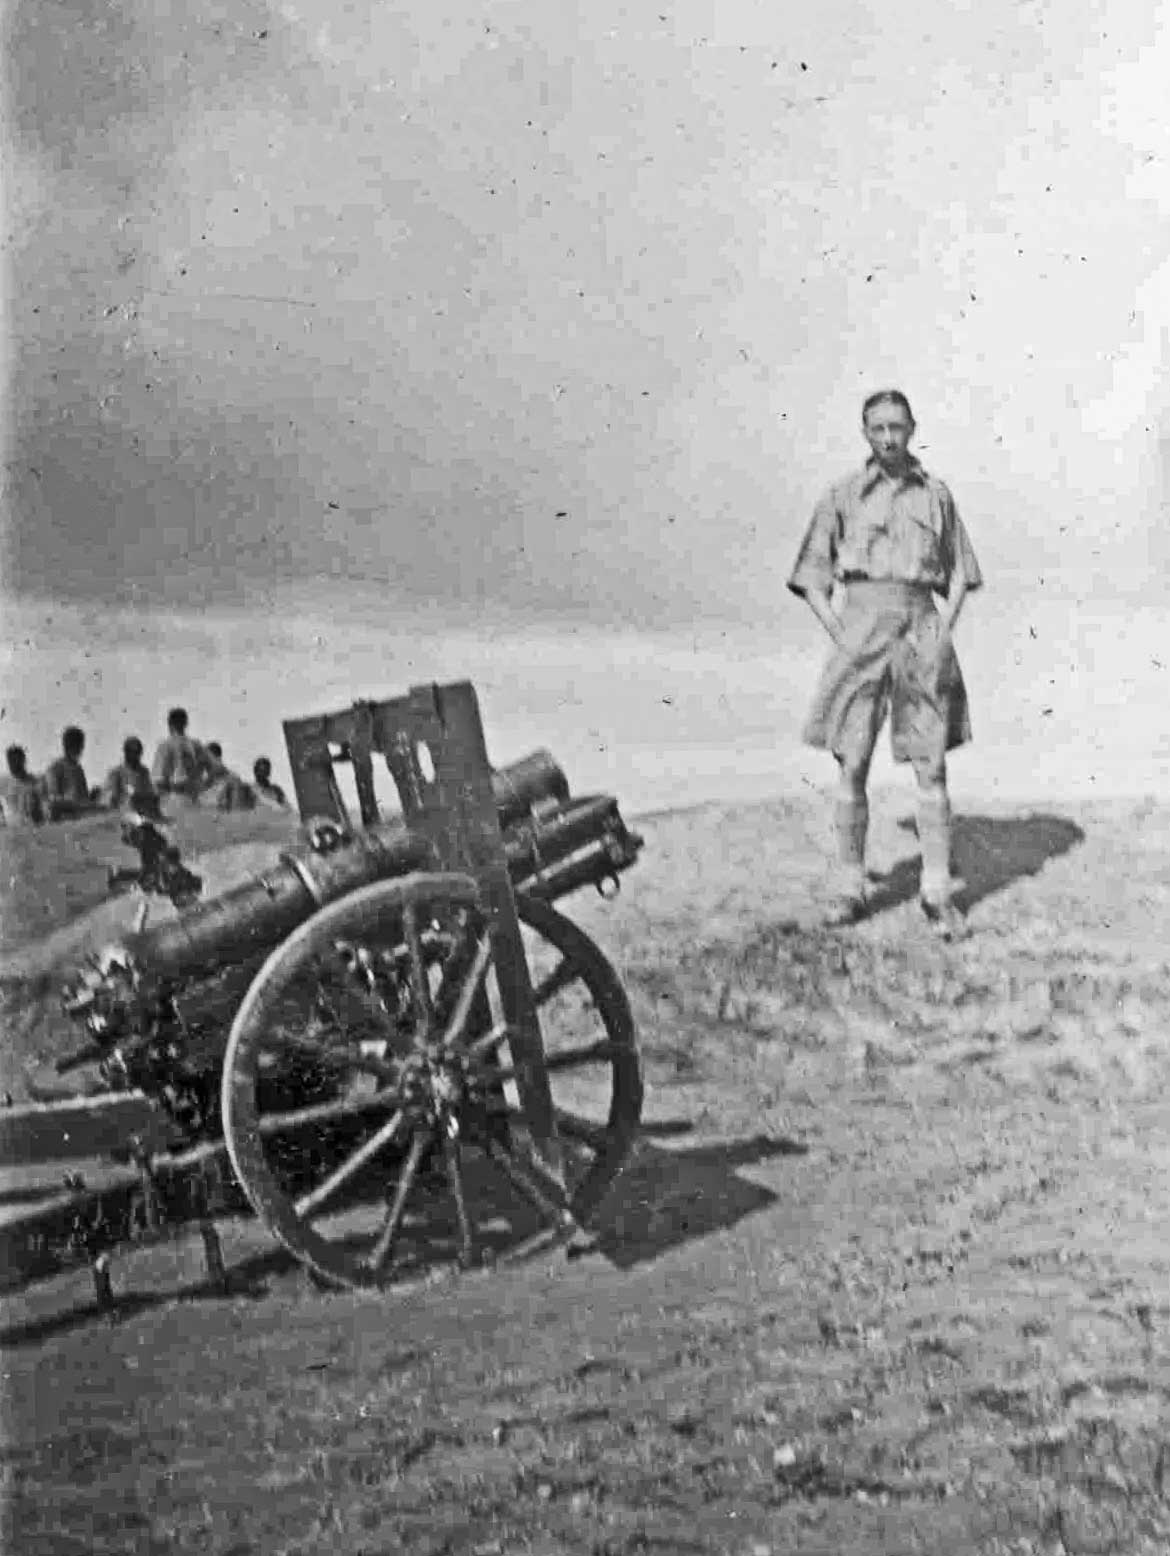 Jock and 3.7 inch mountain Howitzer